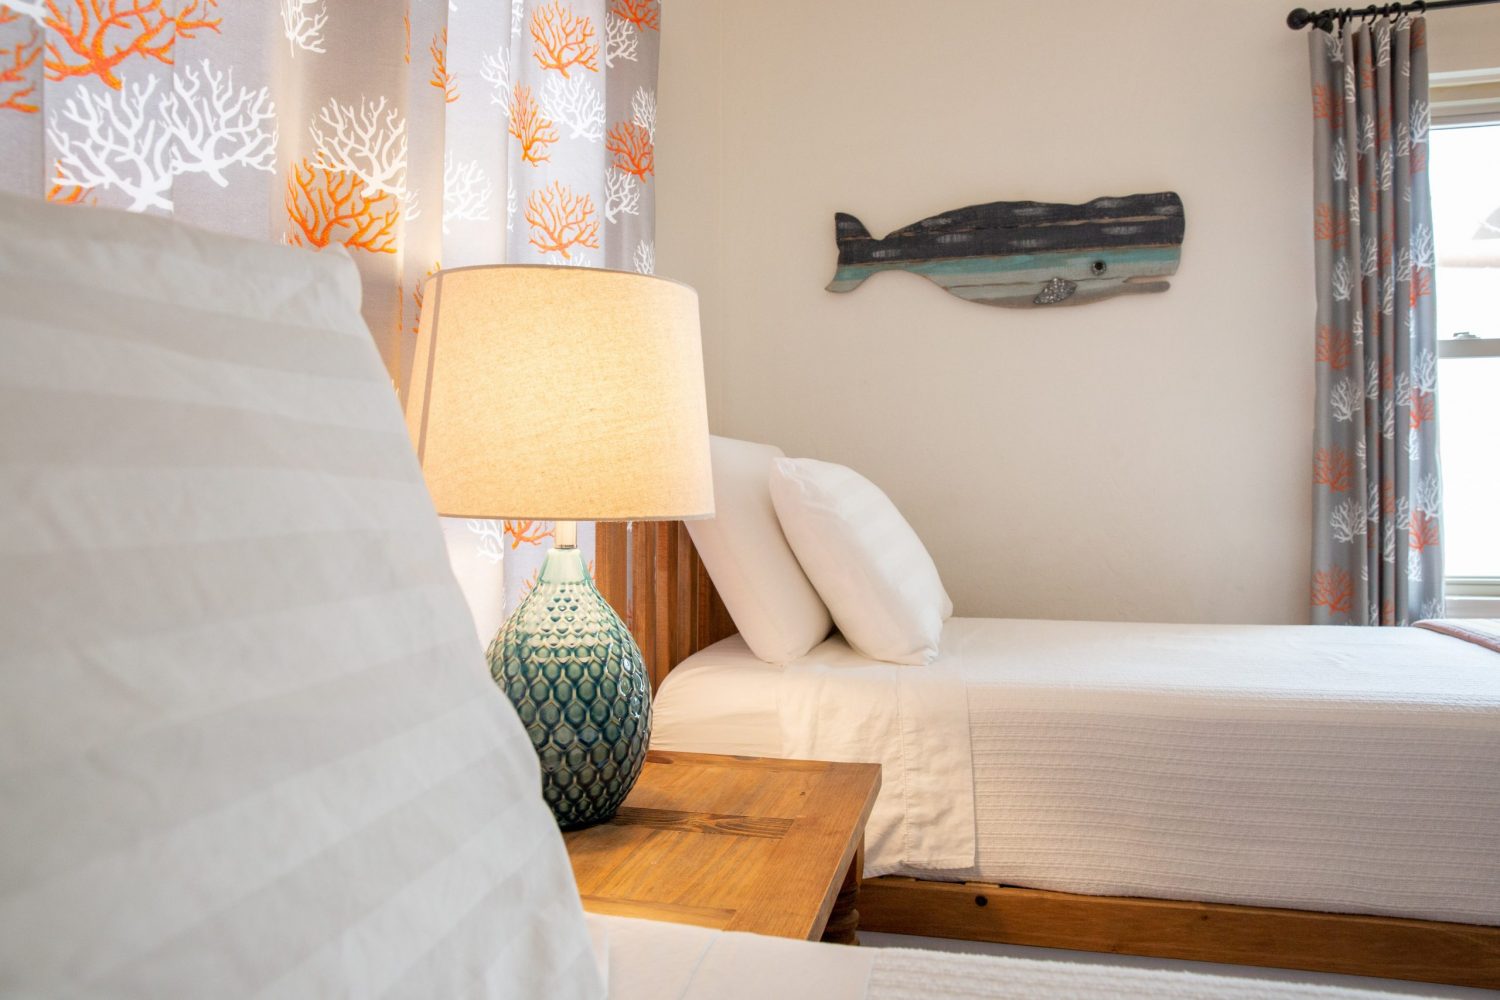 two beds with a ceramic fish on the wall and a lamp in between